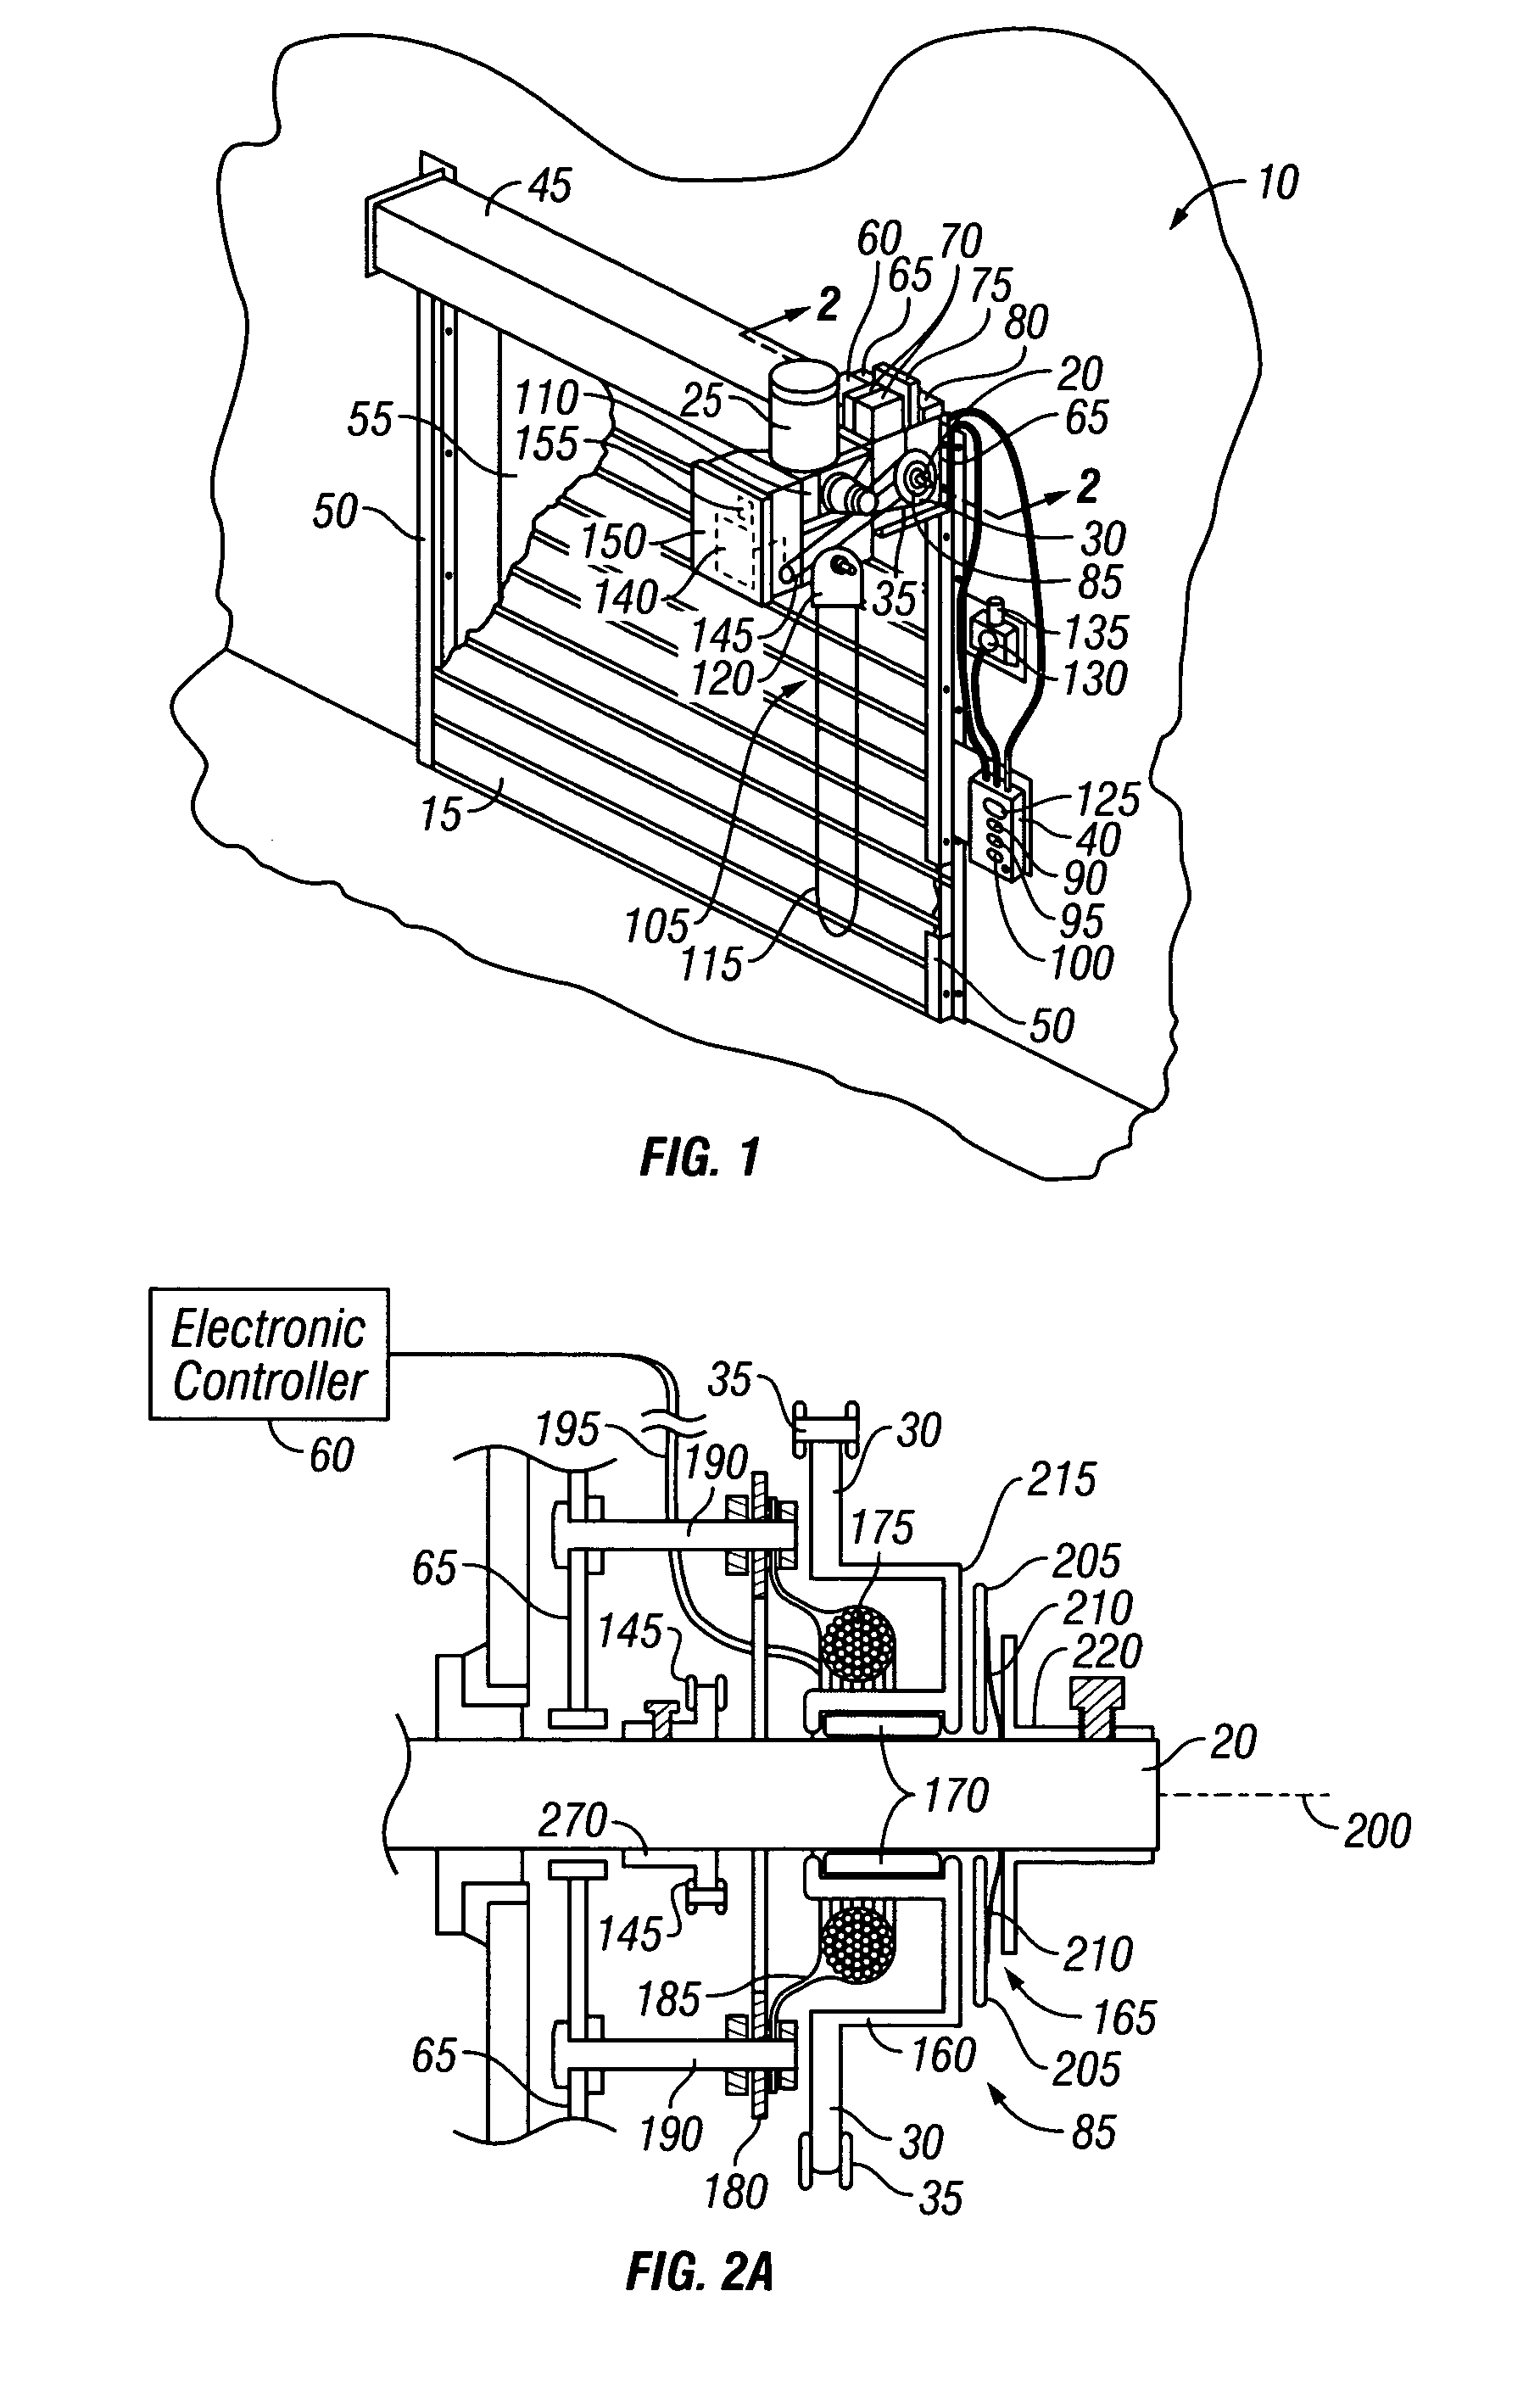 Fire door control system and method